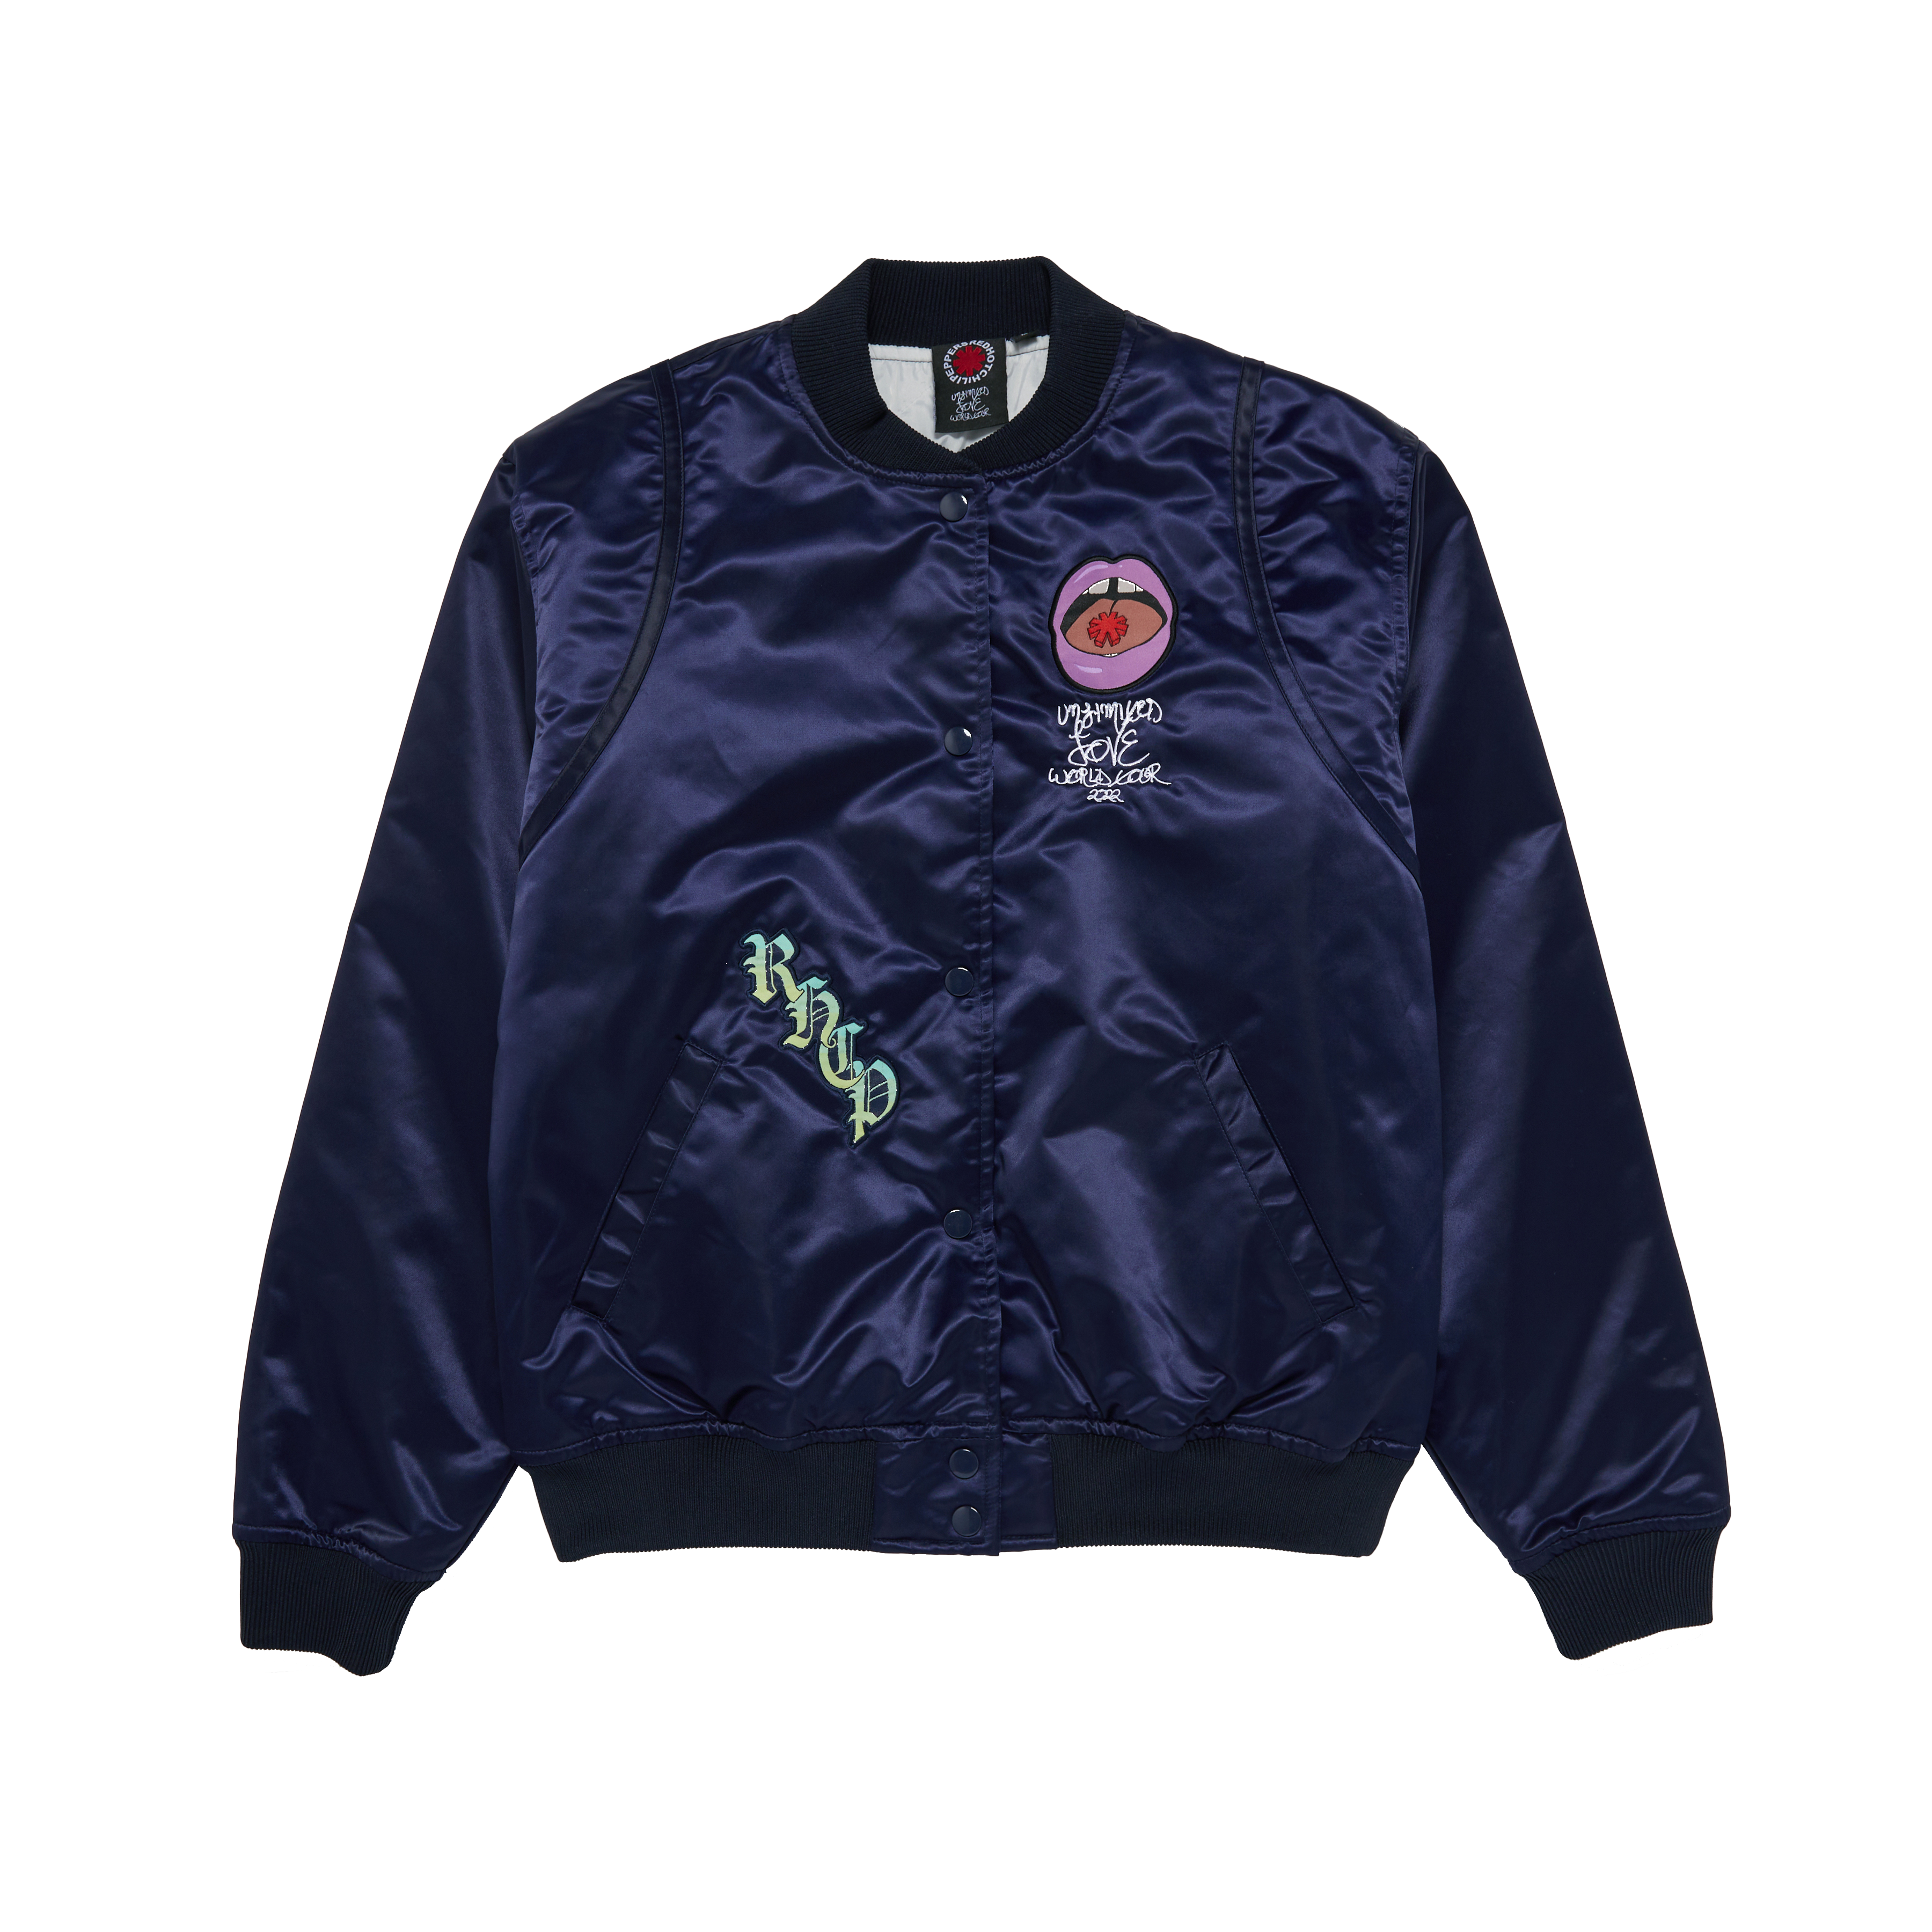 RED HOT CHILI PEPPERS BOMBER JACKET | labiela.com